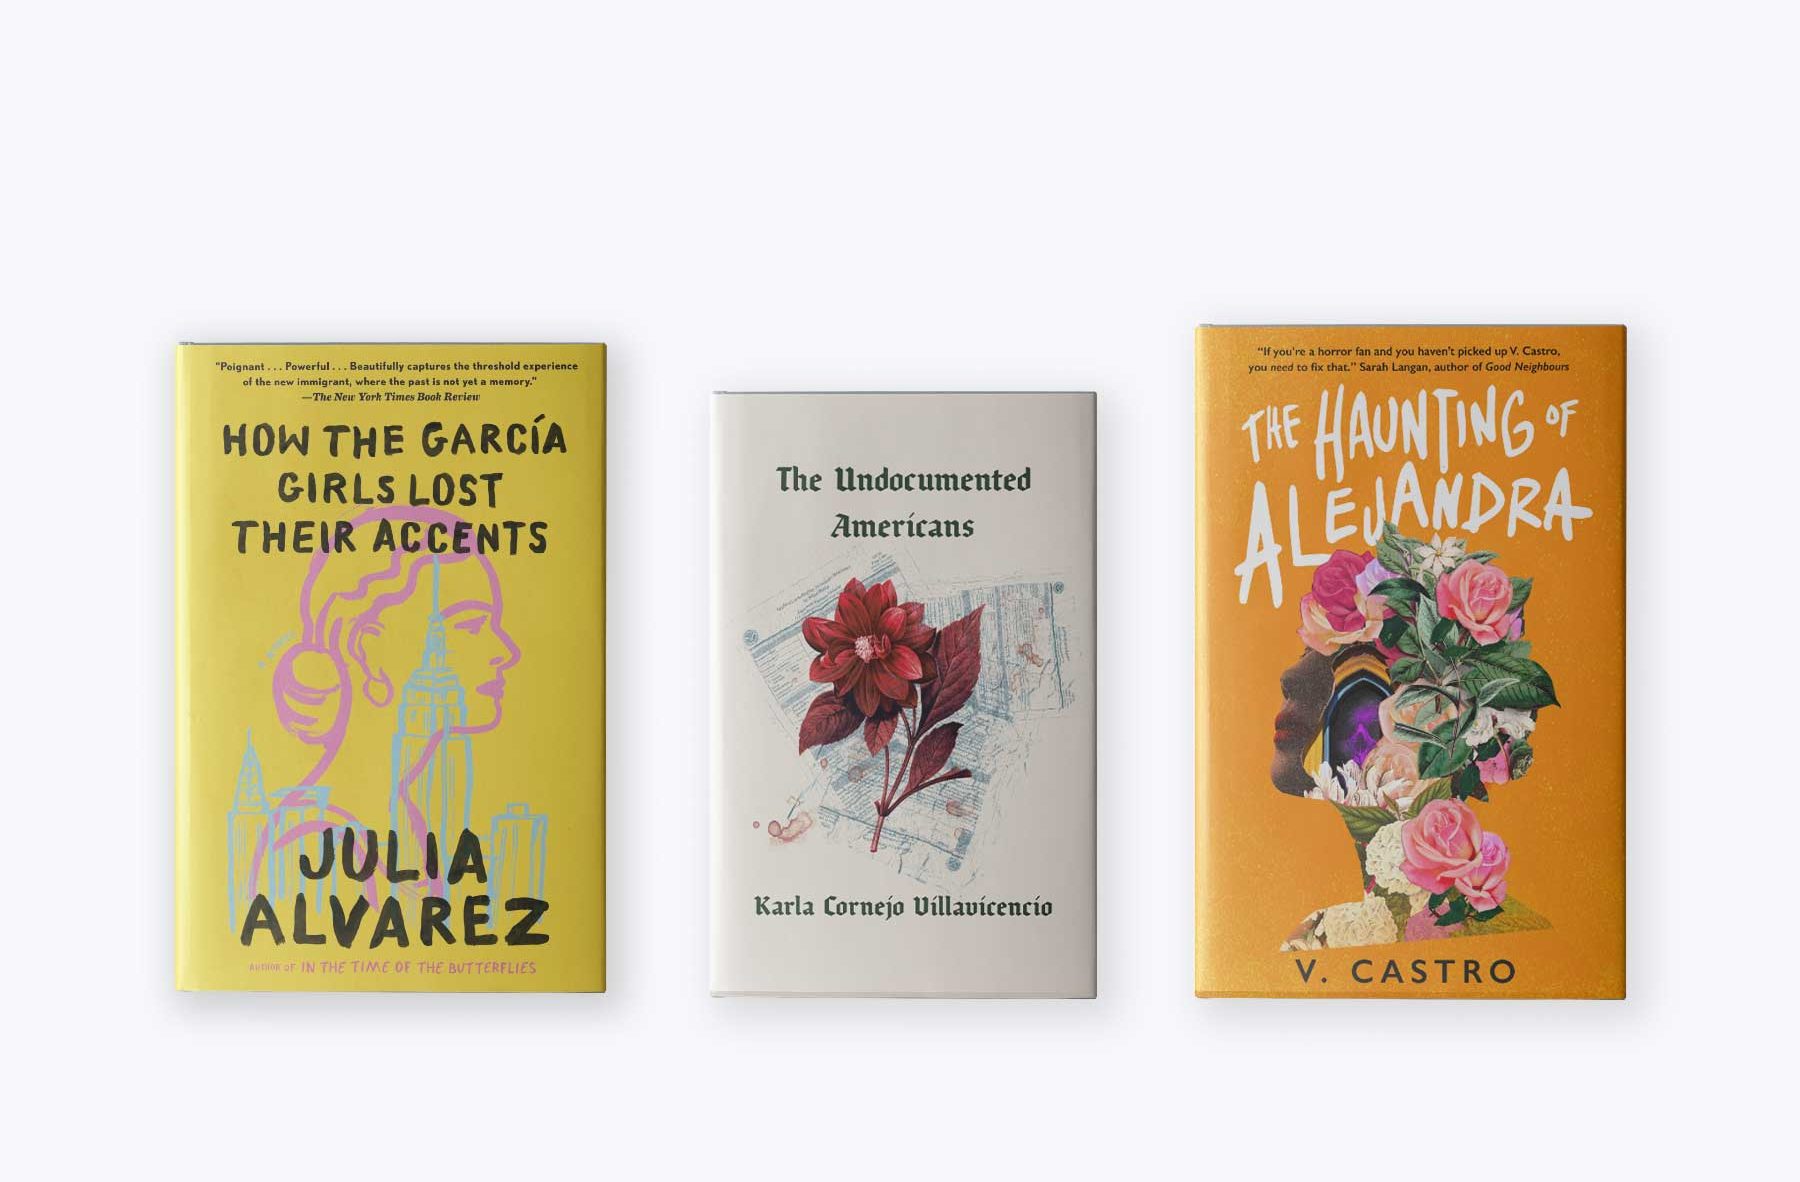 The covers of three books titled How The Garcia Girls Lost Their Accents, The Undocumented Americans and The Haunting of Alejandra.